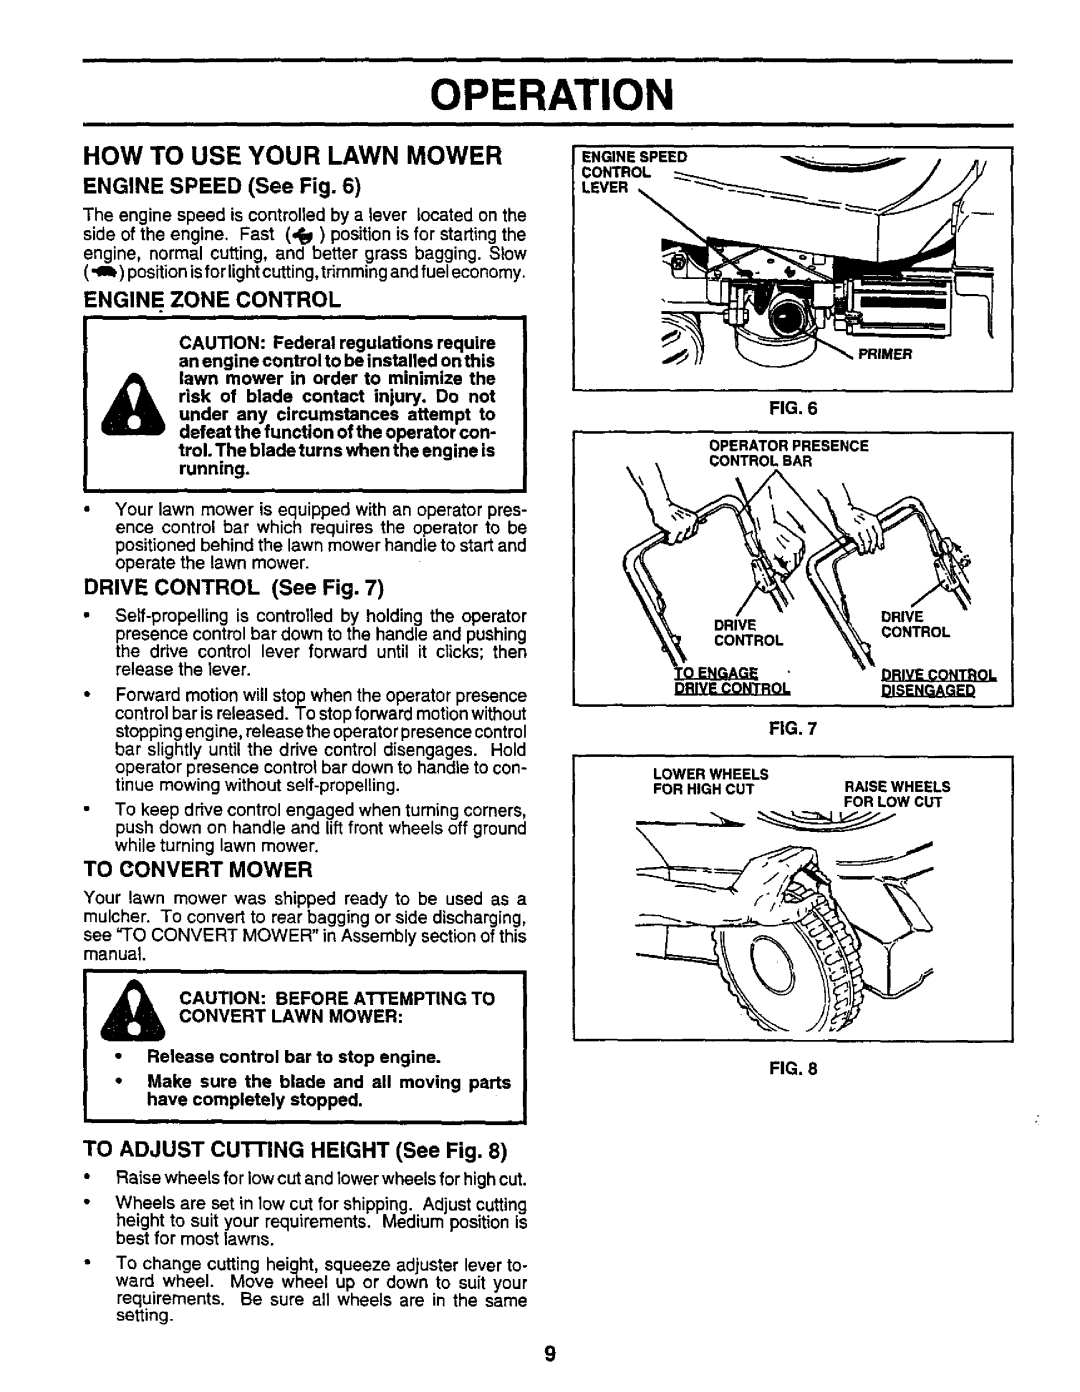 Sears 917.373981 owner manual Operation, How To Use Your Lawn Mower, ENGINE SPEED See Fig, Engine Zone Control 